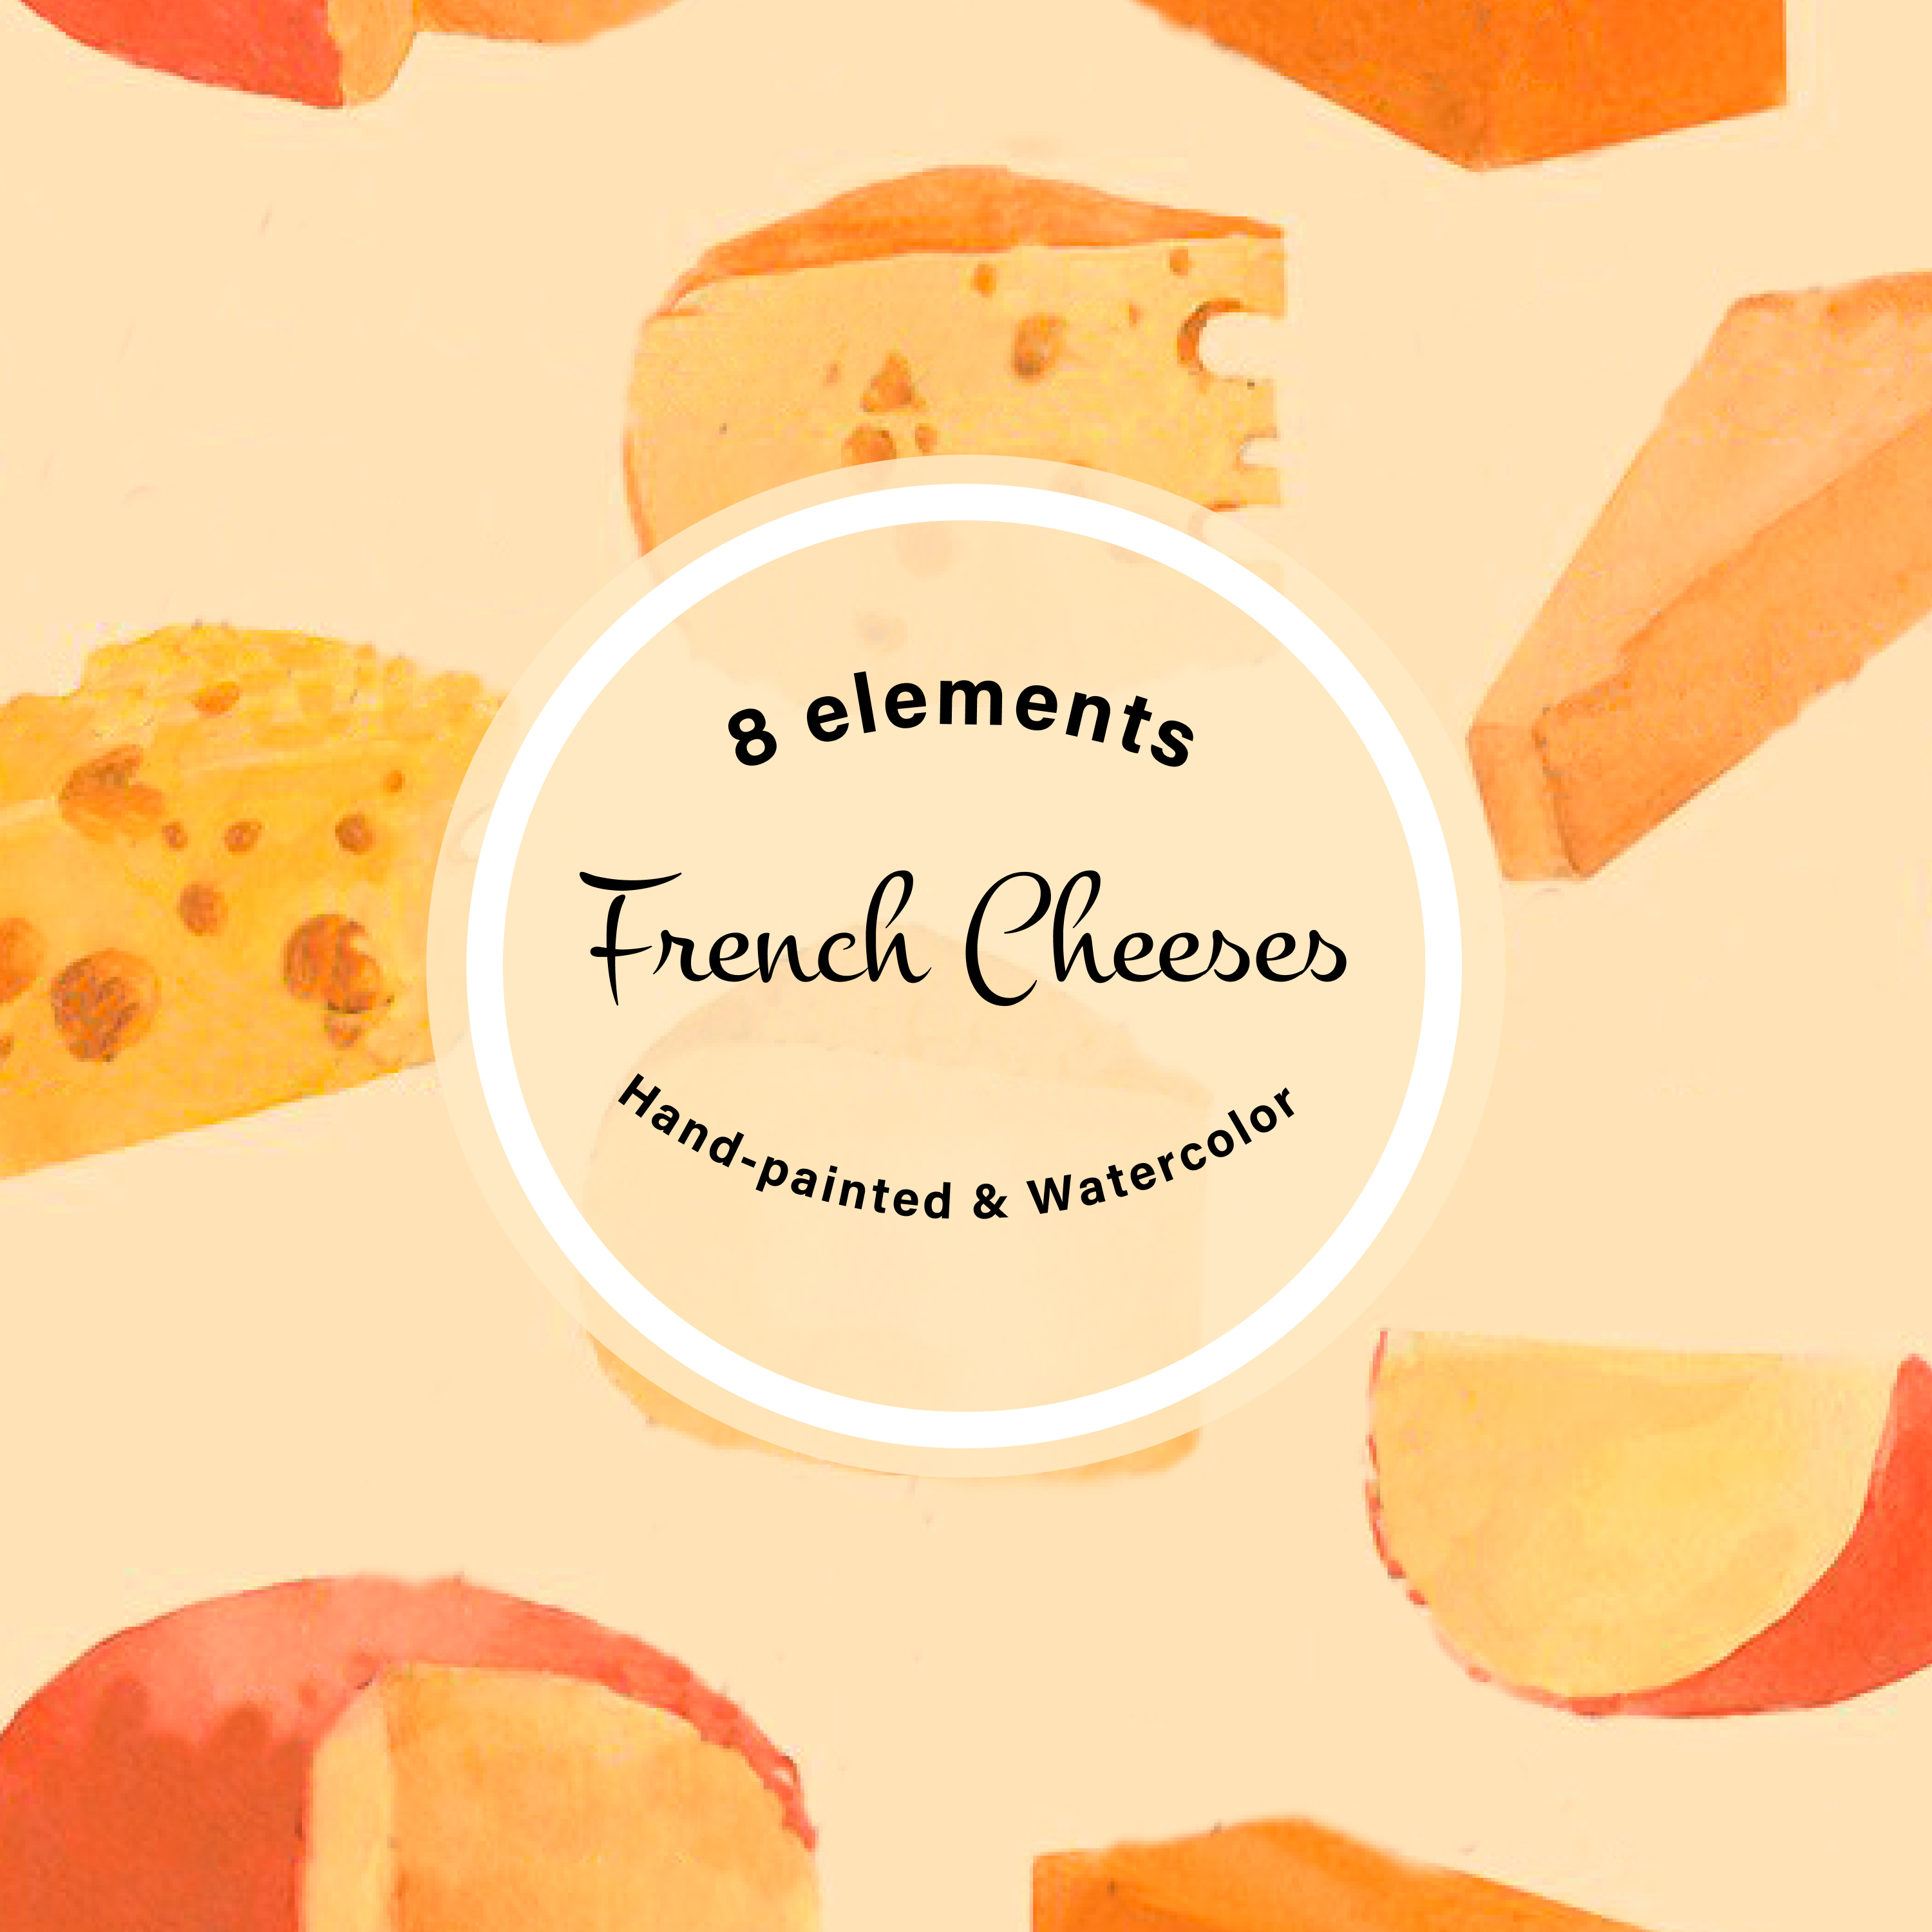 Cover of colorful images of french cheeses.